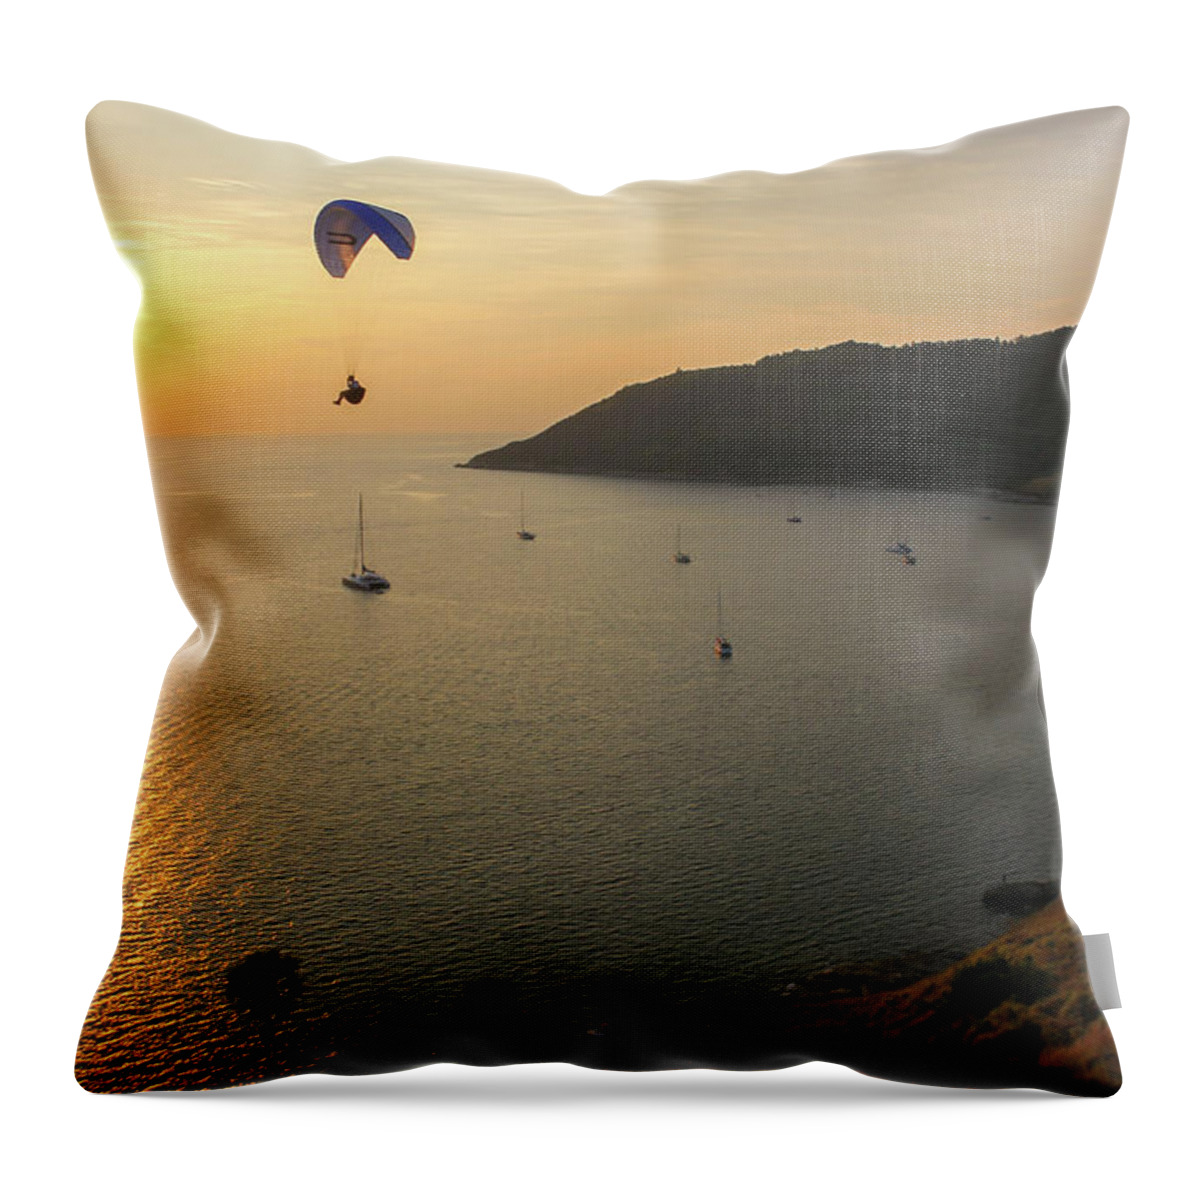 Paragliding Throw Pillow featuring the photograph Dreaming Alive by Josu Ozkaritz